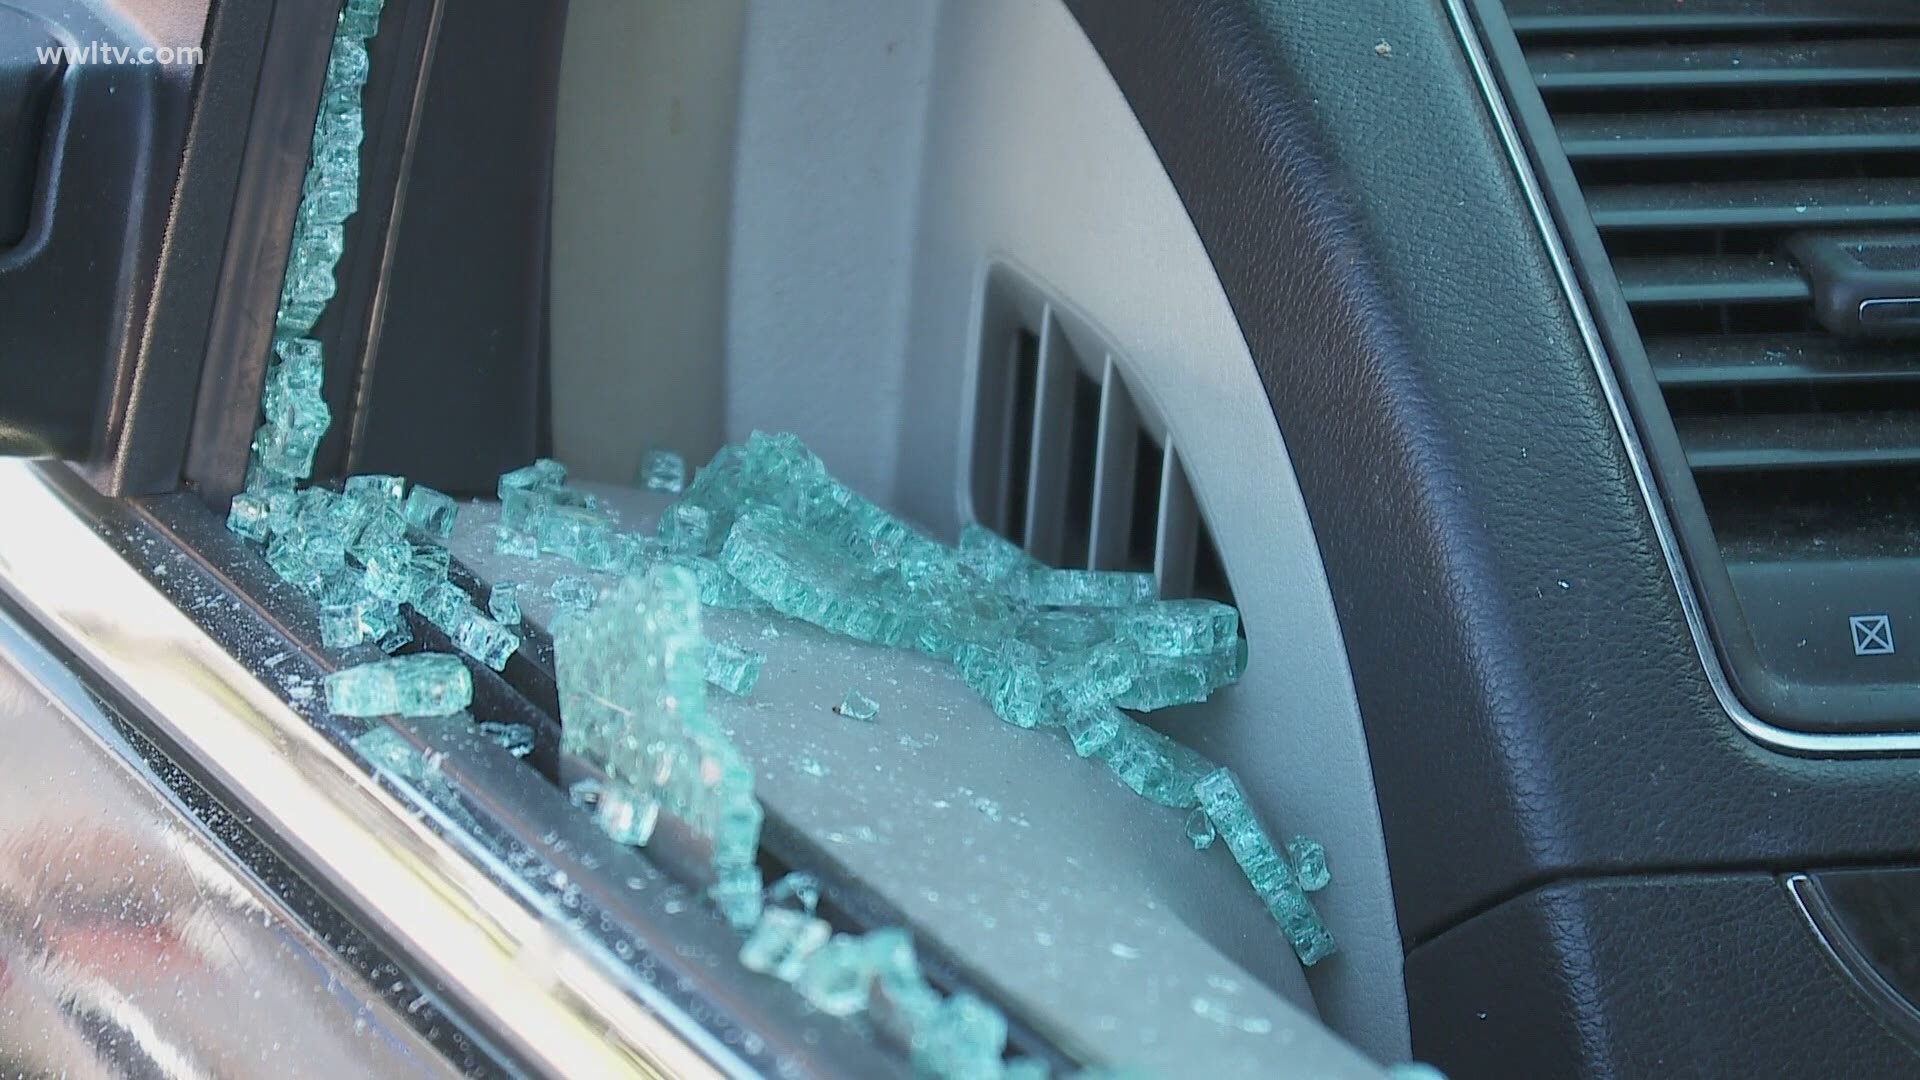 Treme residents are frustrated after waking up to a neighborhood of broken car windows.